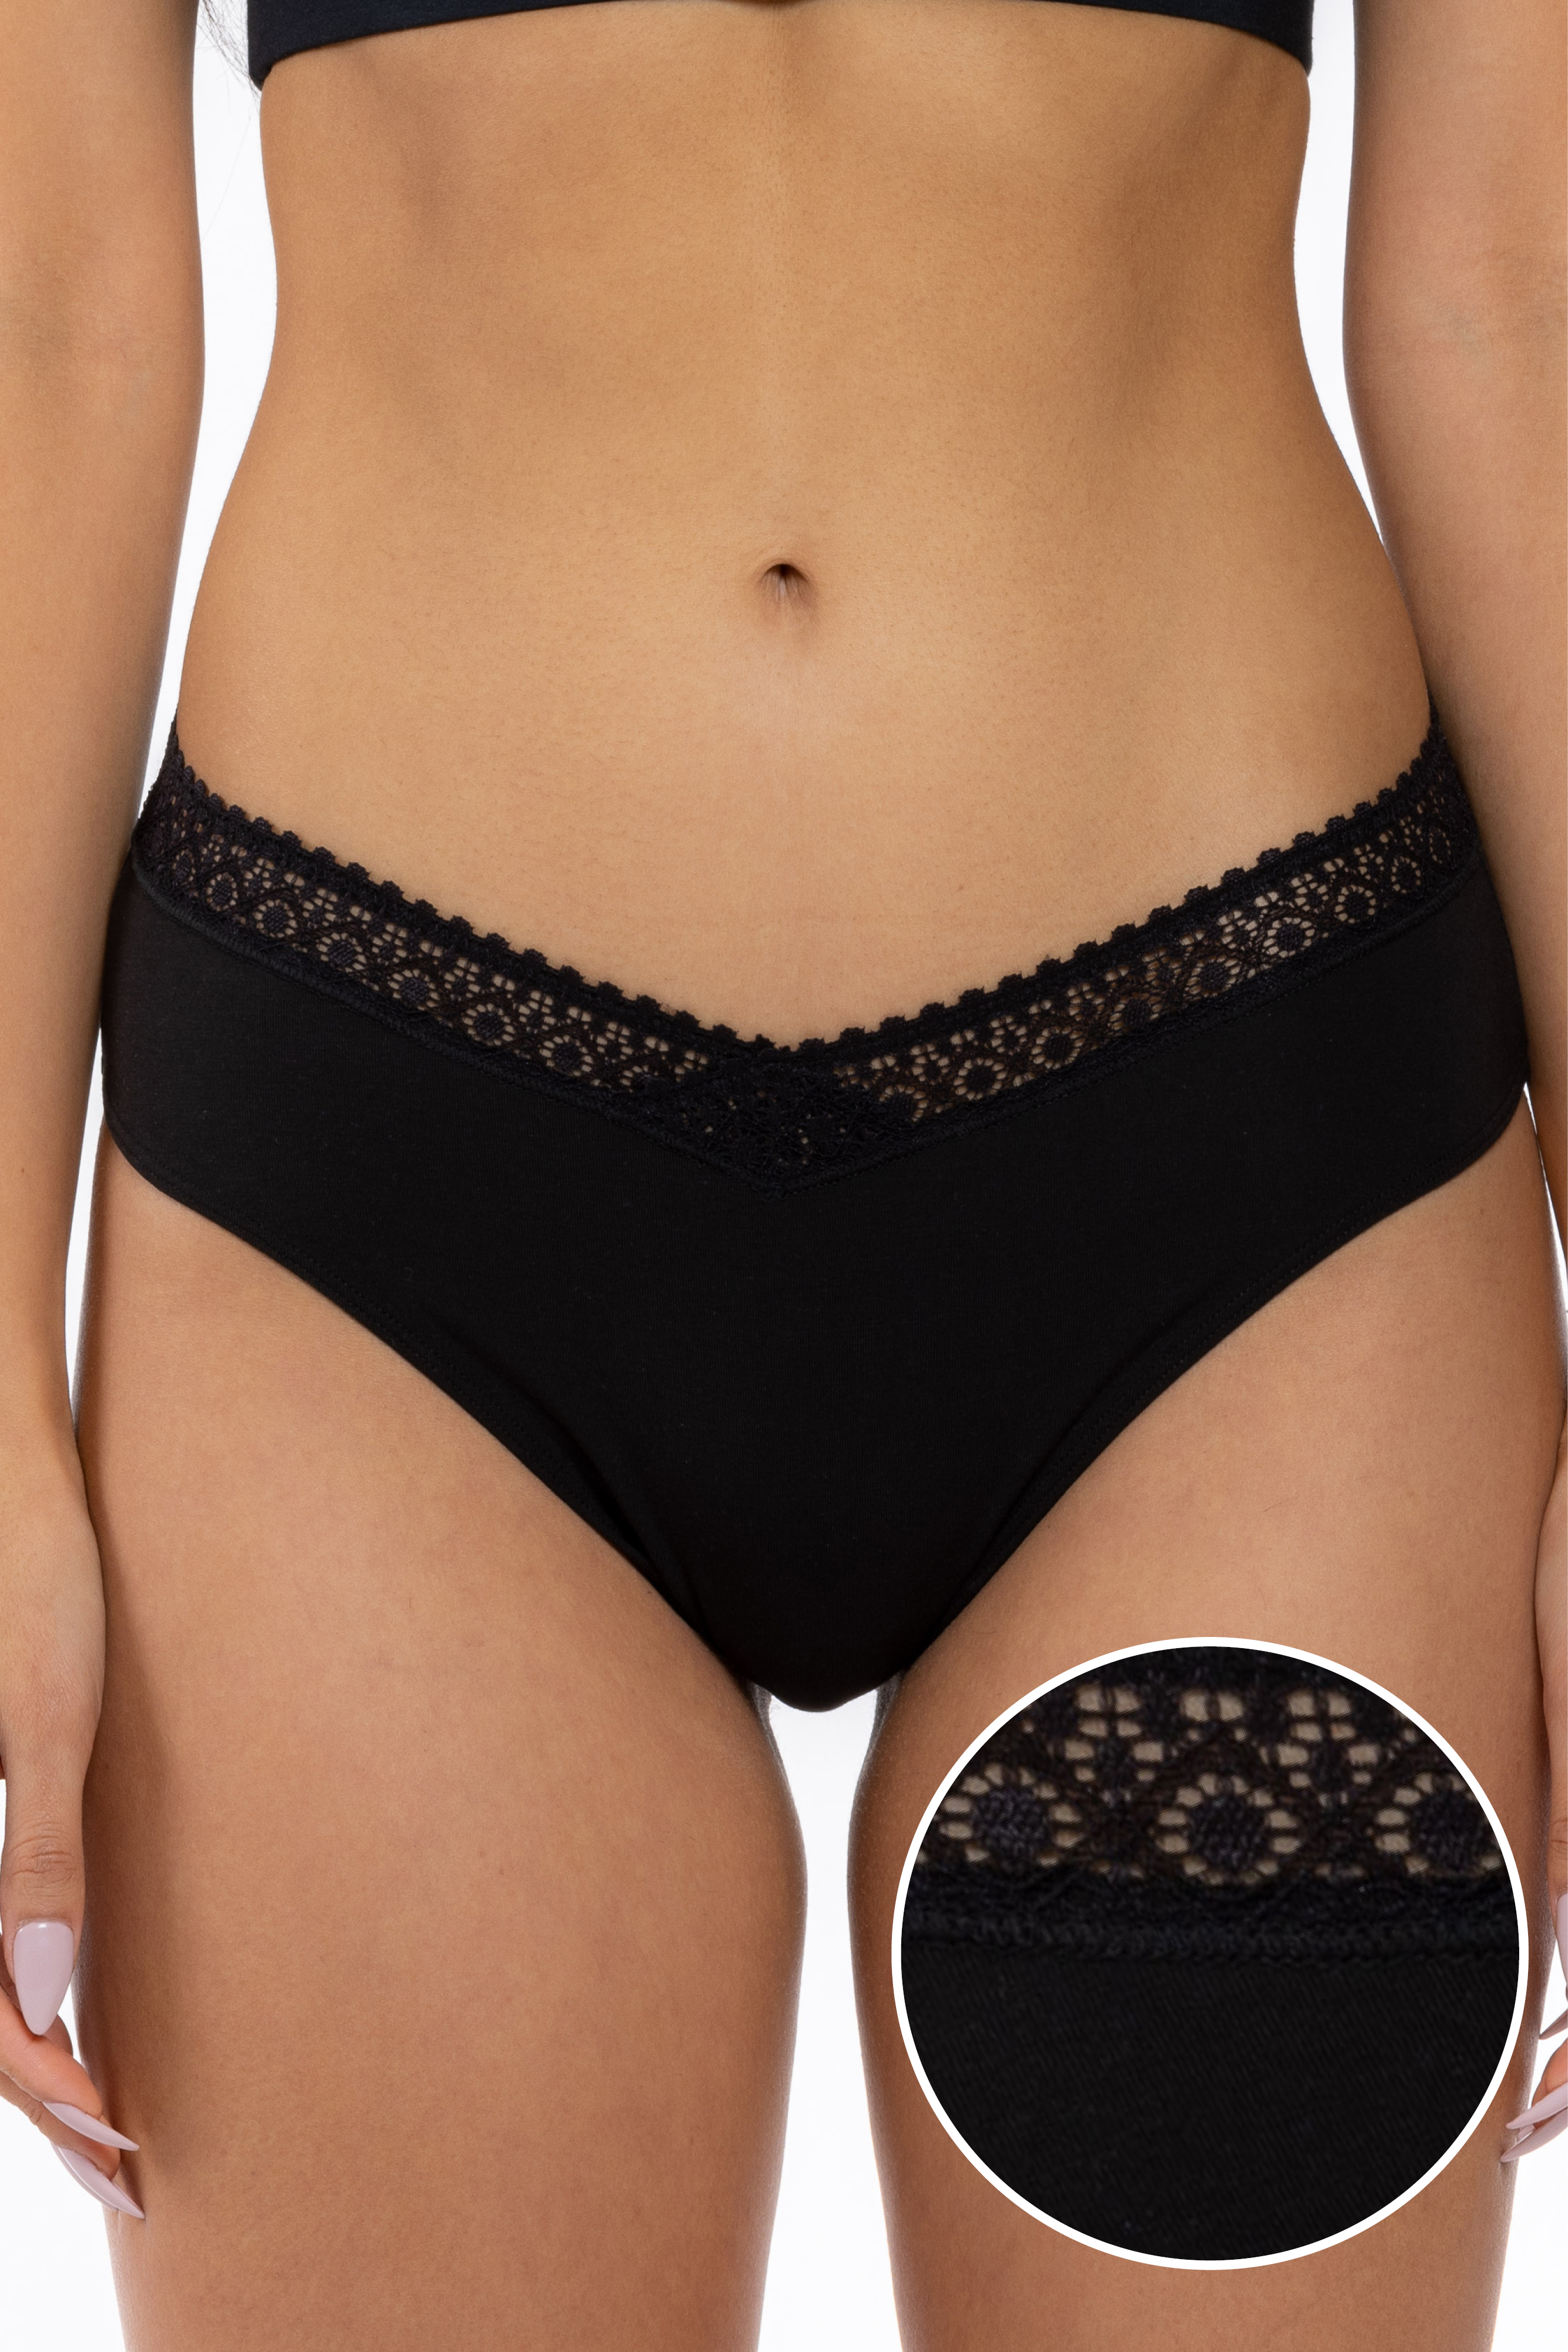 The Threat Level Midnight | Black Lace Trim Cheeky Panty